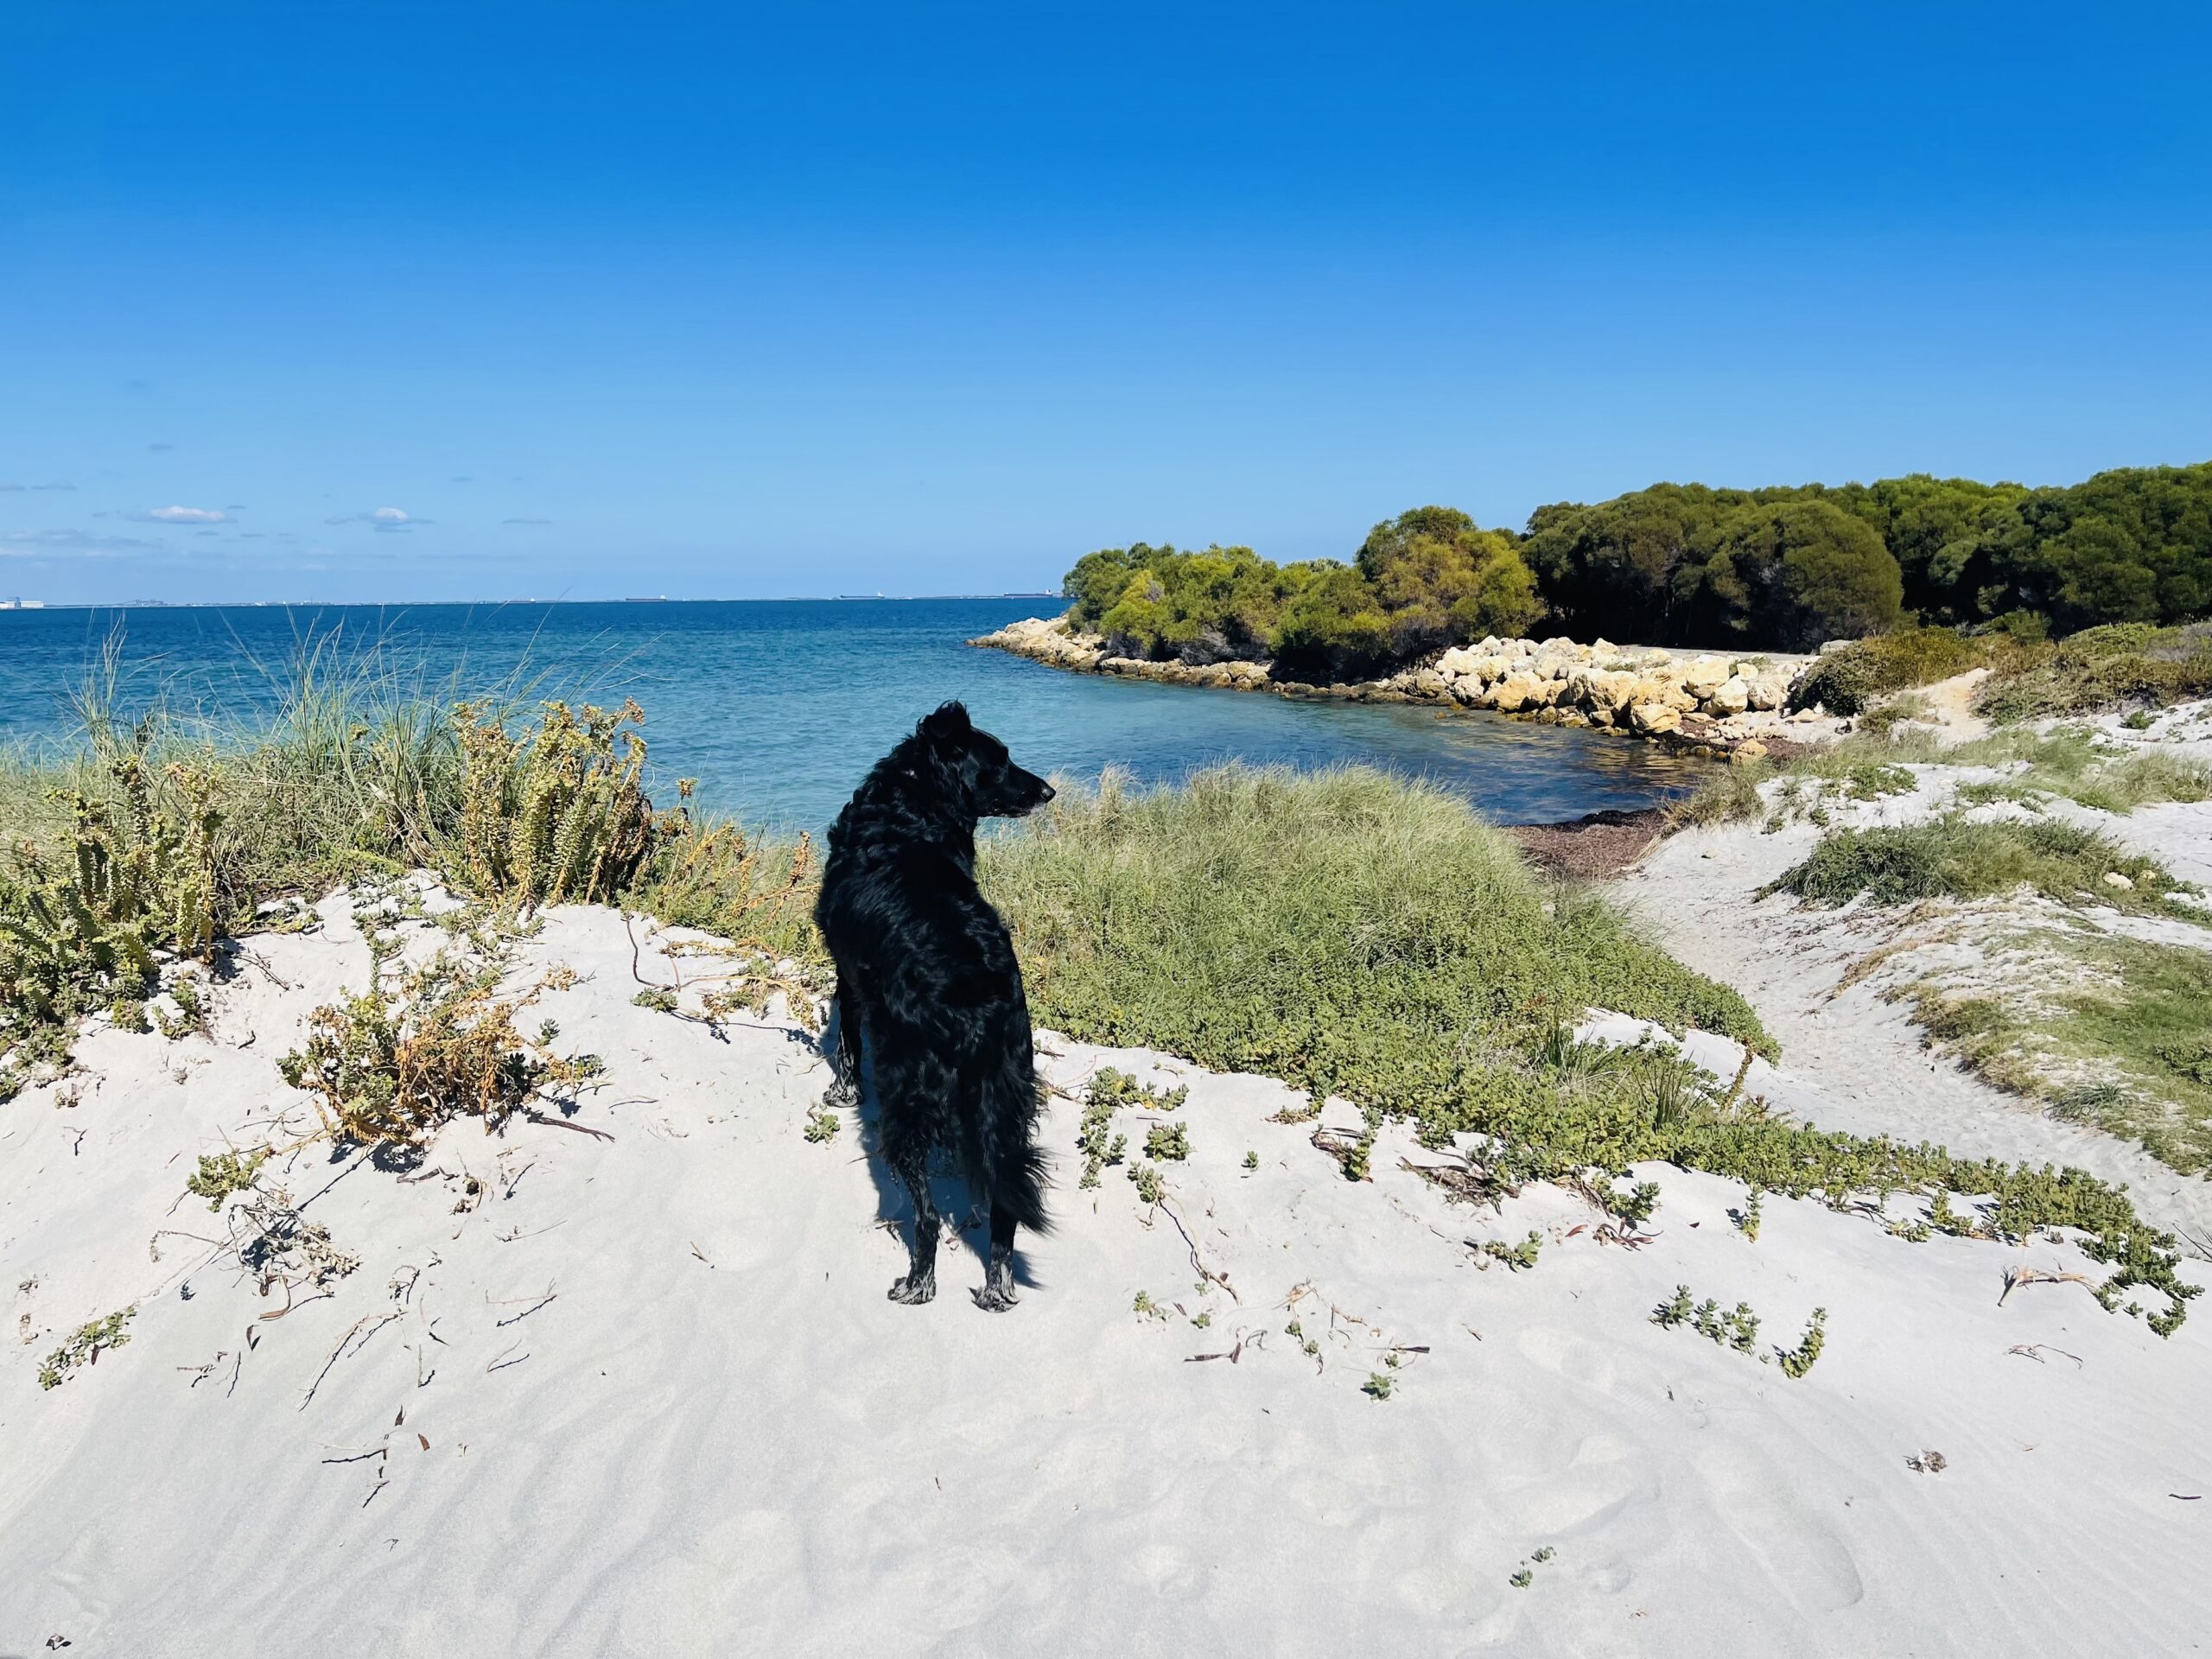 This photograph captures a black medium-sized dog standing on the white sand dunes. There is green shrubbery along the sand dunes, and a rocky groyne extending into the ocean. The dog is looking to the right off into the distance.